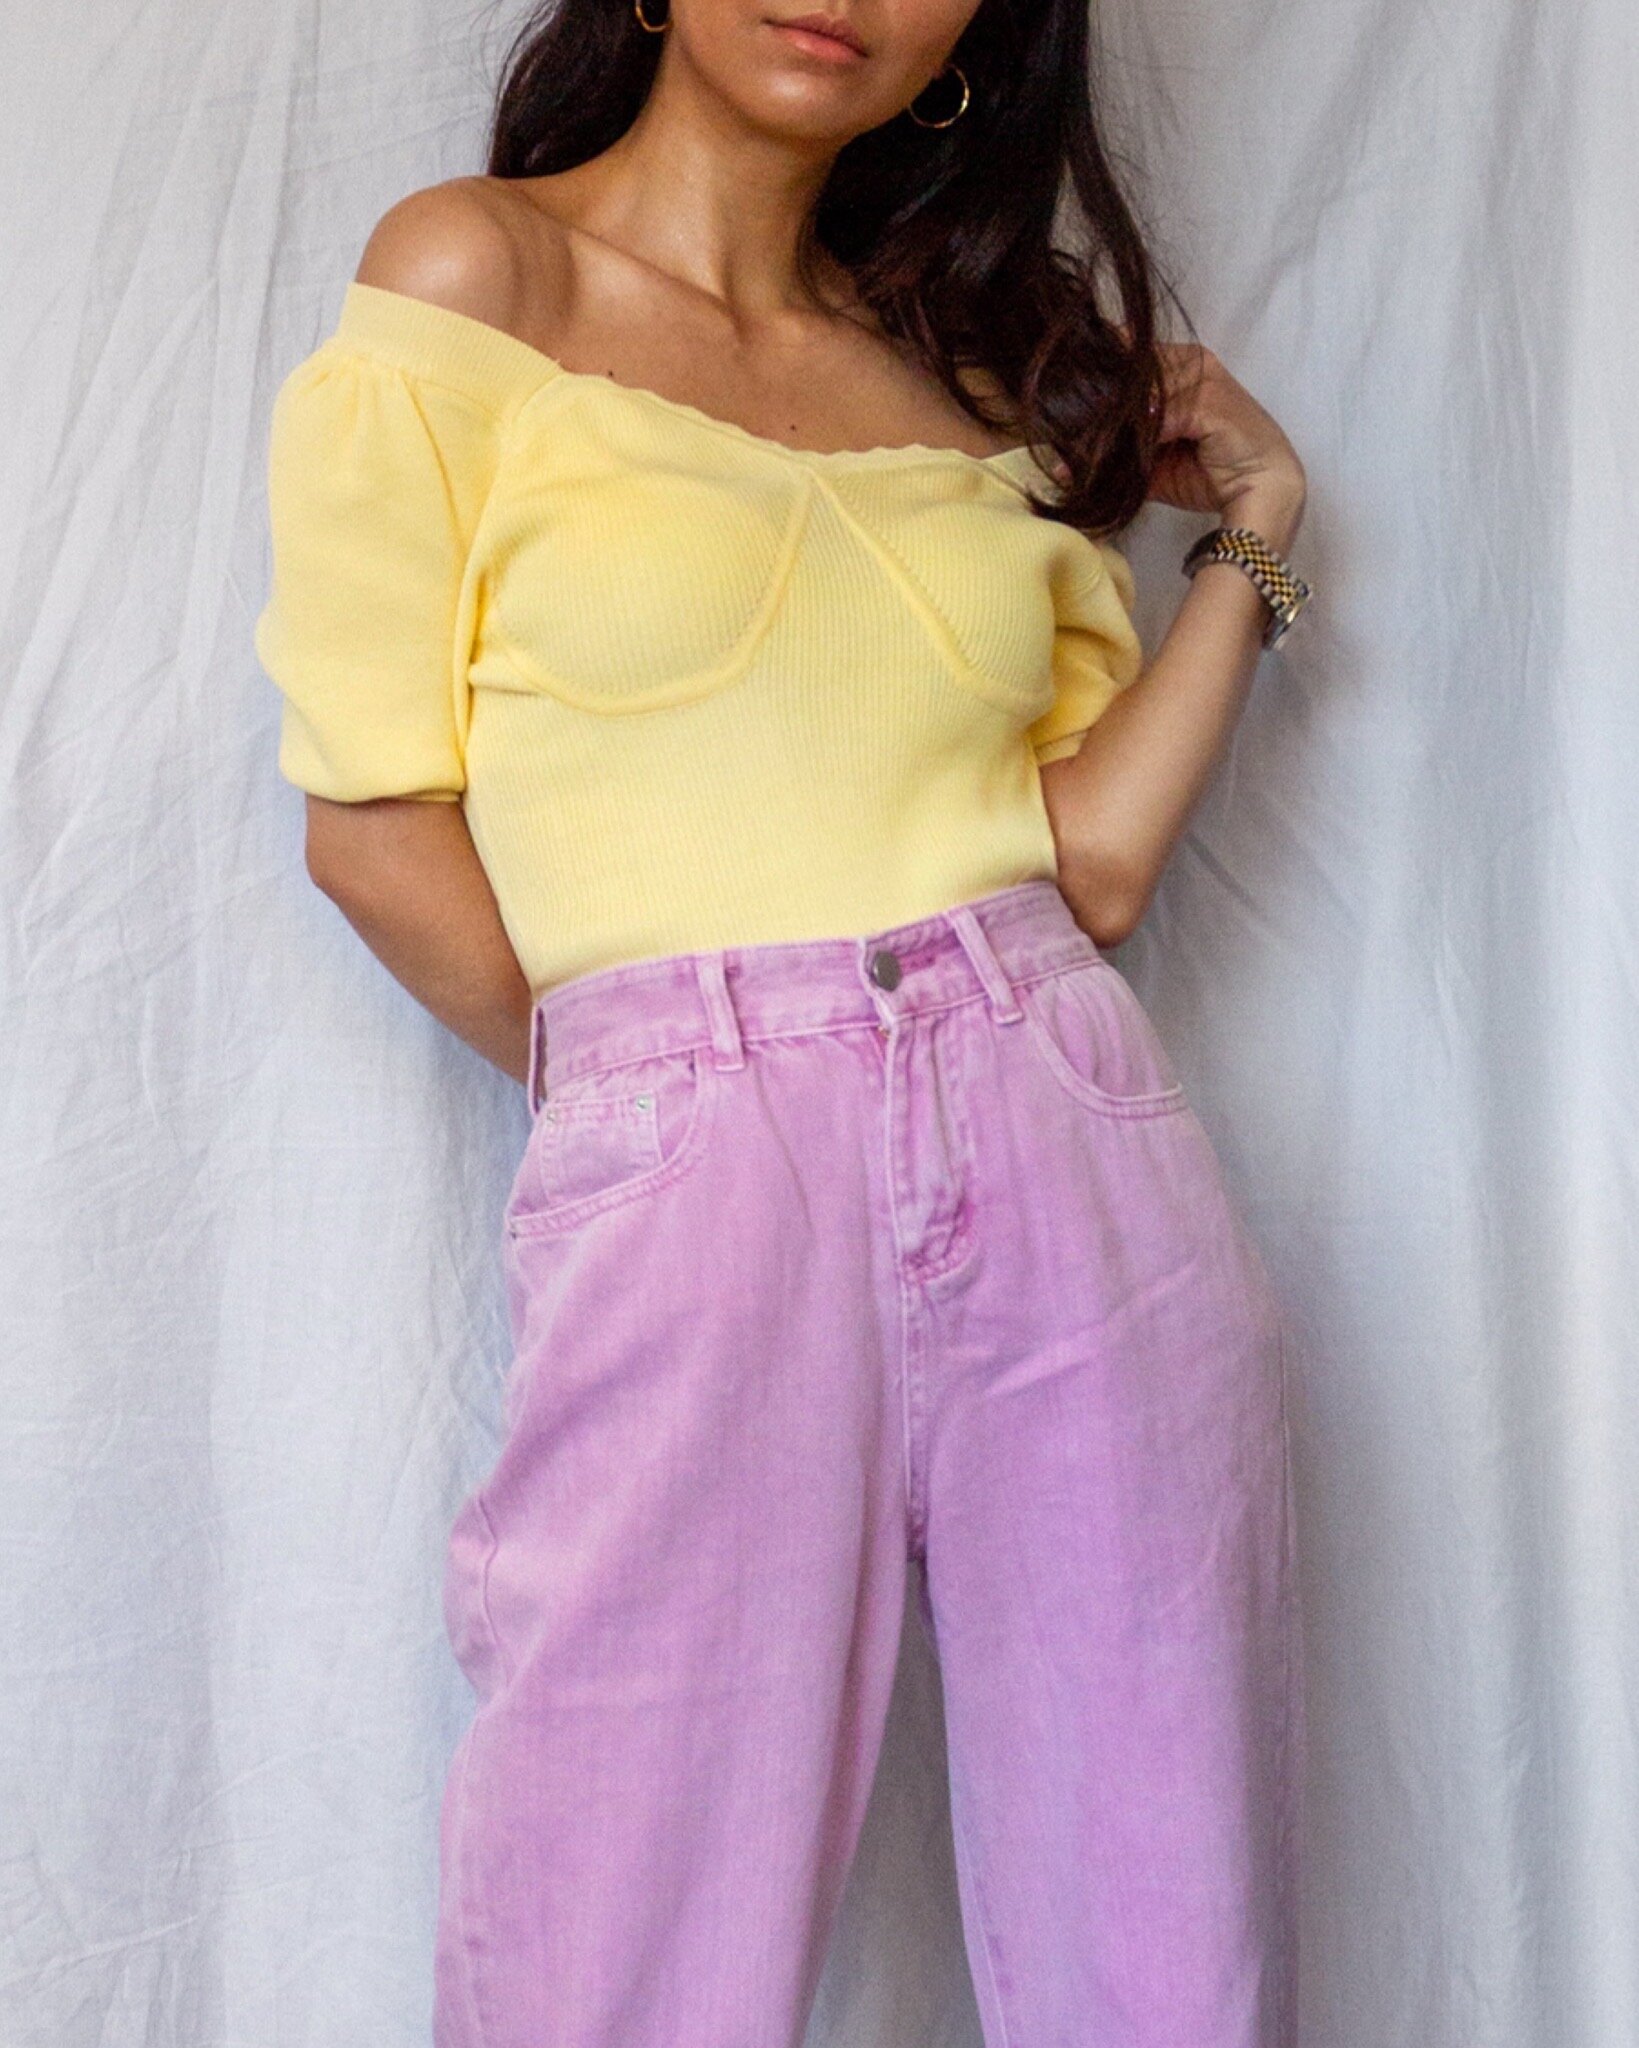 Yellow knit top